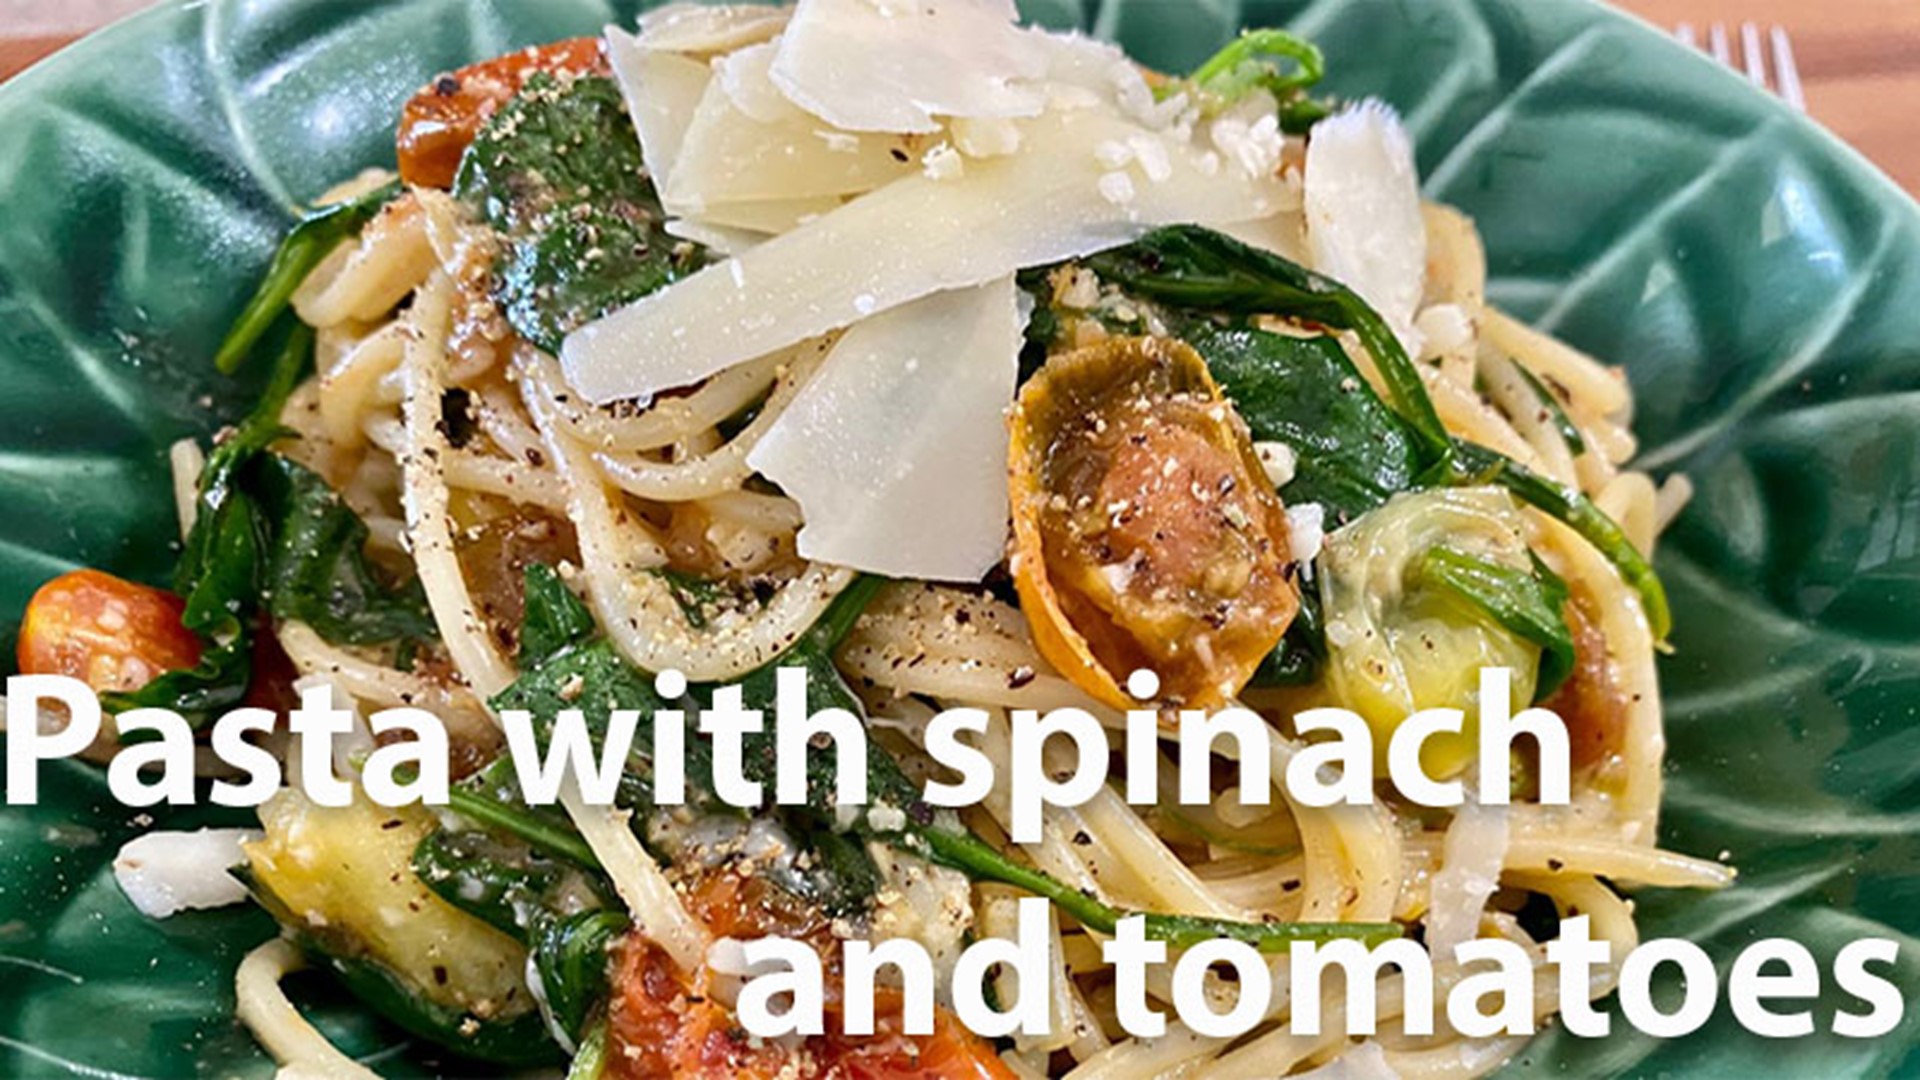 March 26th is National Spinach day so Kev made this super easy, fast and delicious Pasta with Spinach and Tomatoes.